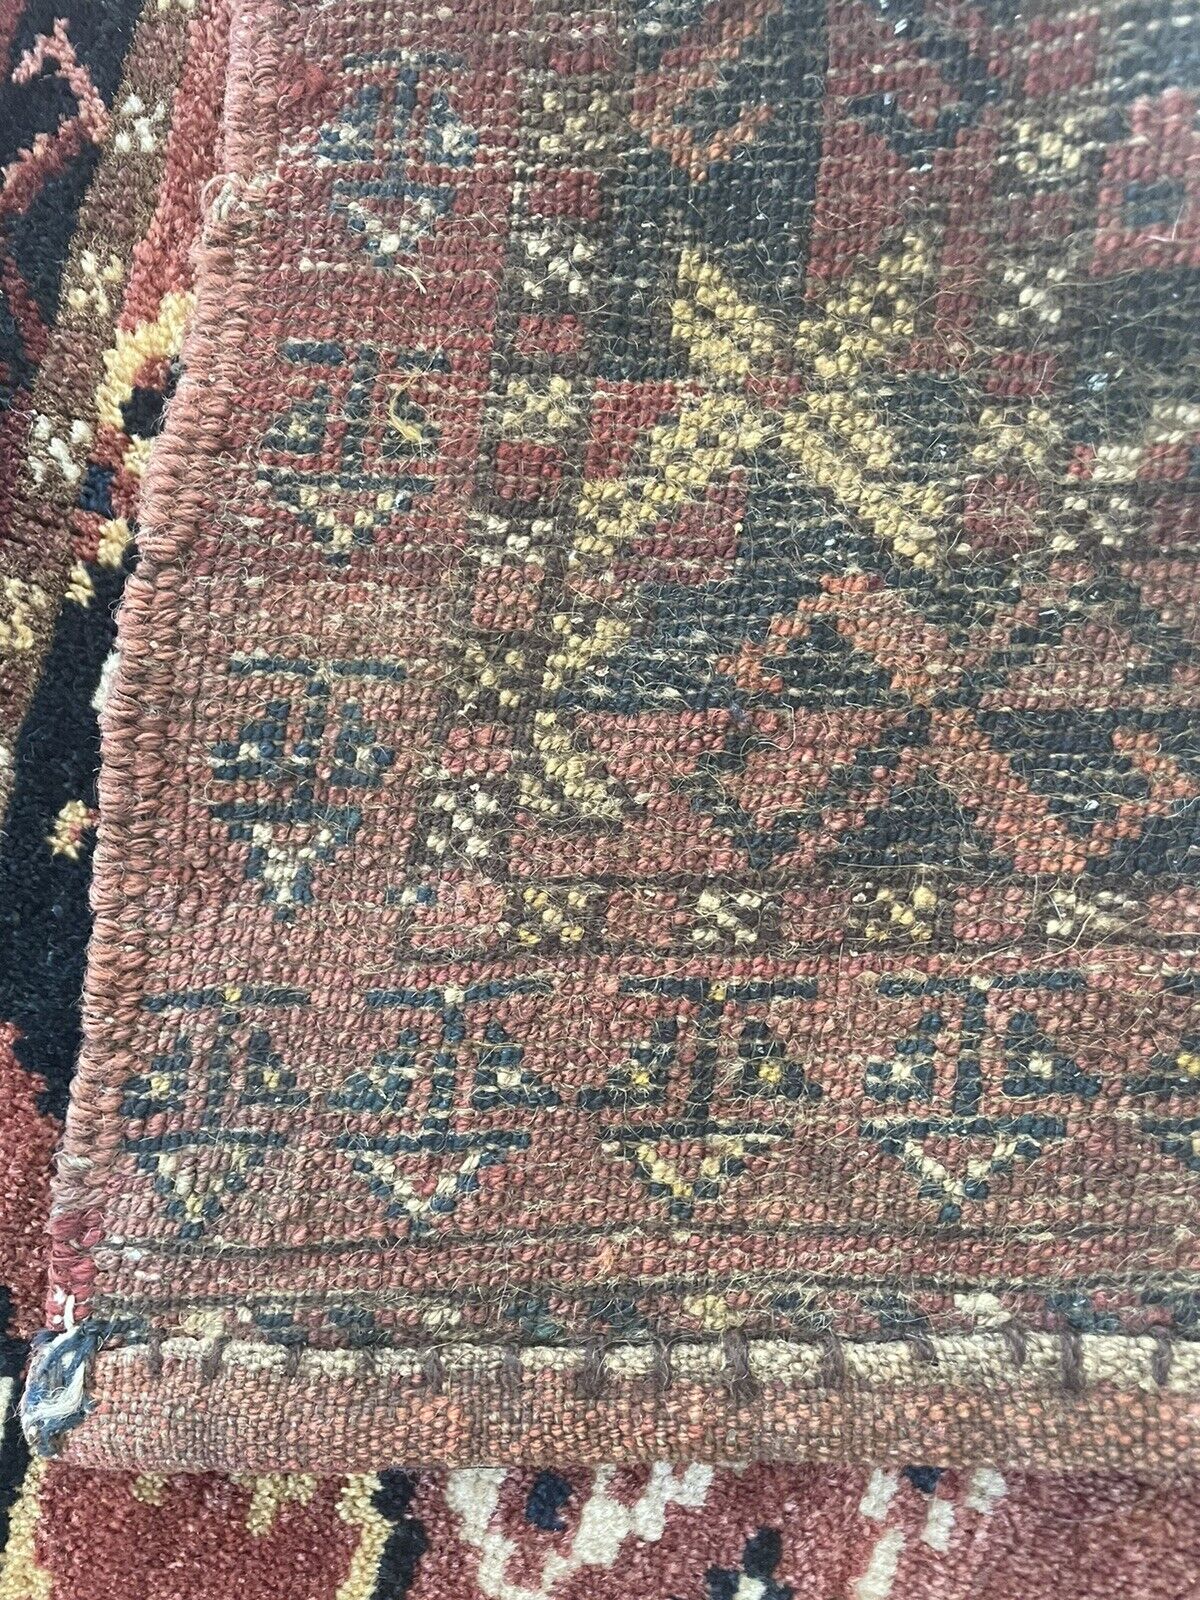 Close-up of cultural heritage on Handmade Antique Afghan Beshir Collectible Chuval Rug - Detailed view showcasing the rug's cultural heritage and connection to Afghanistan, evident in its distinct style and craftsmanship.